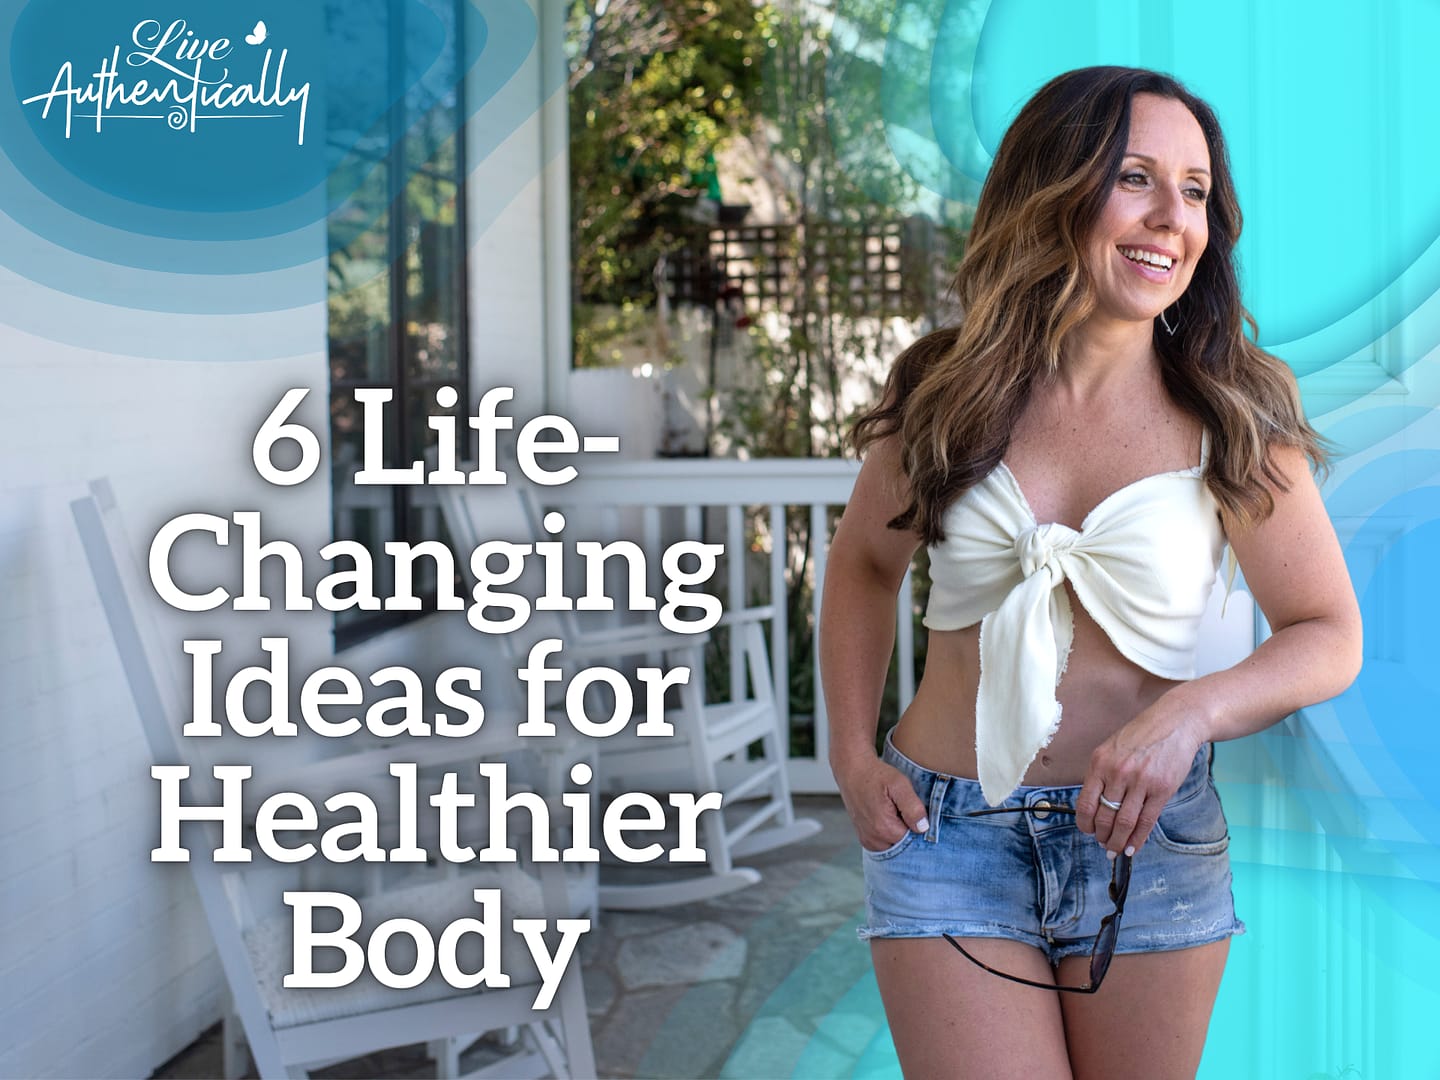 6 Life-Changing Ideas for Healthier Body